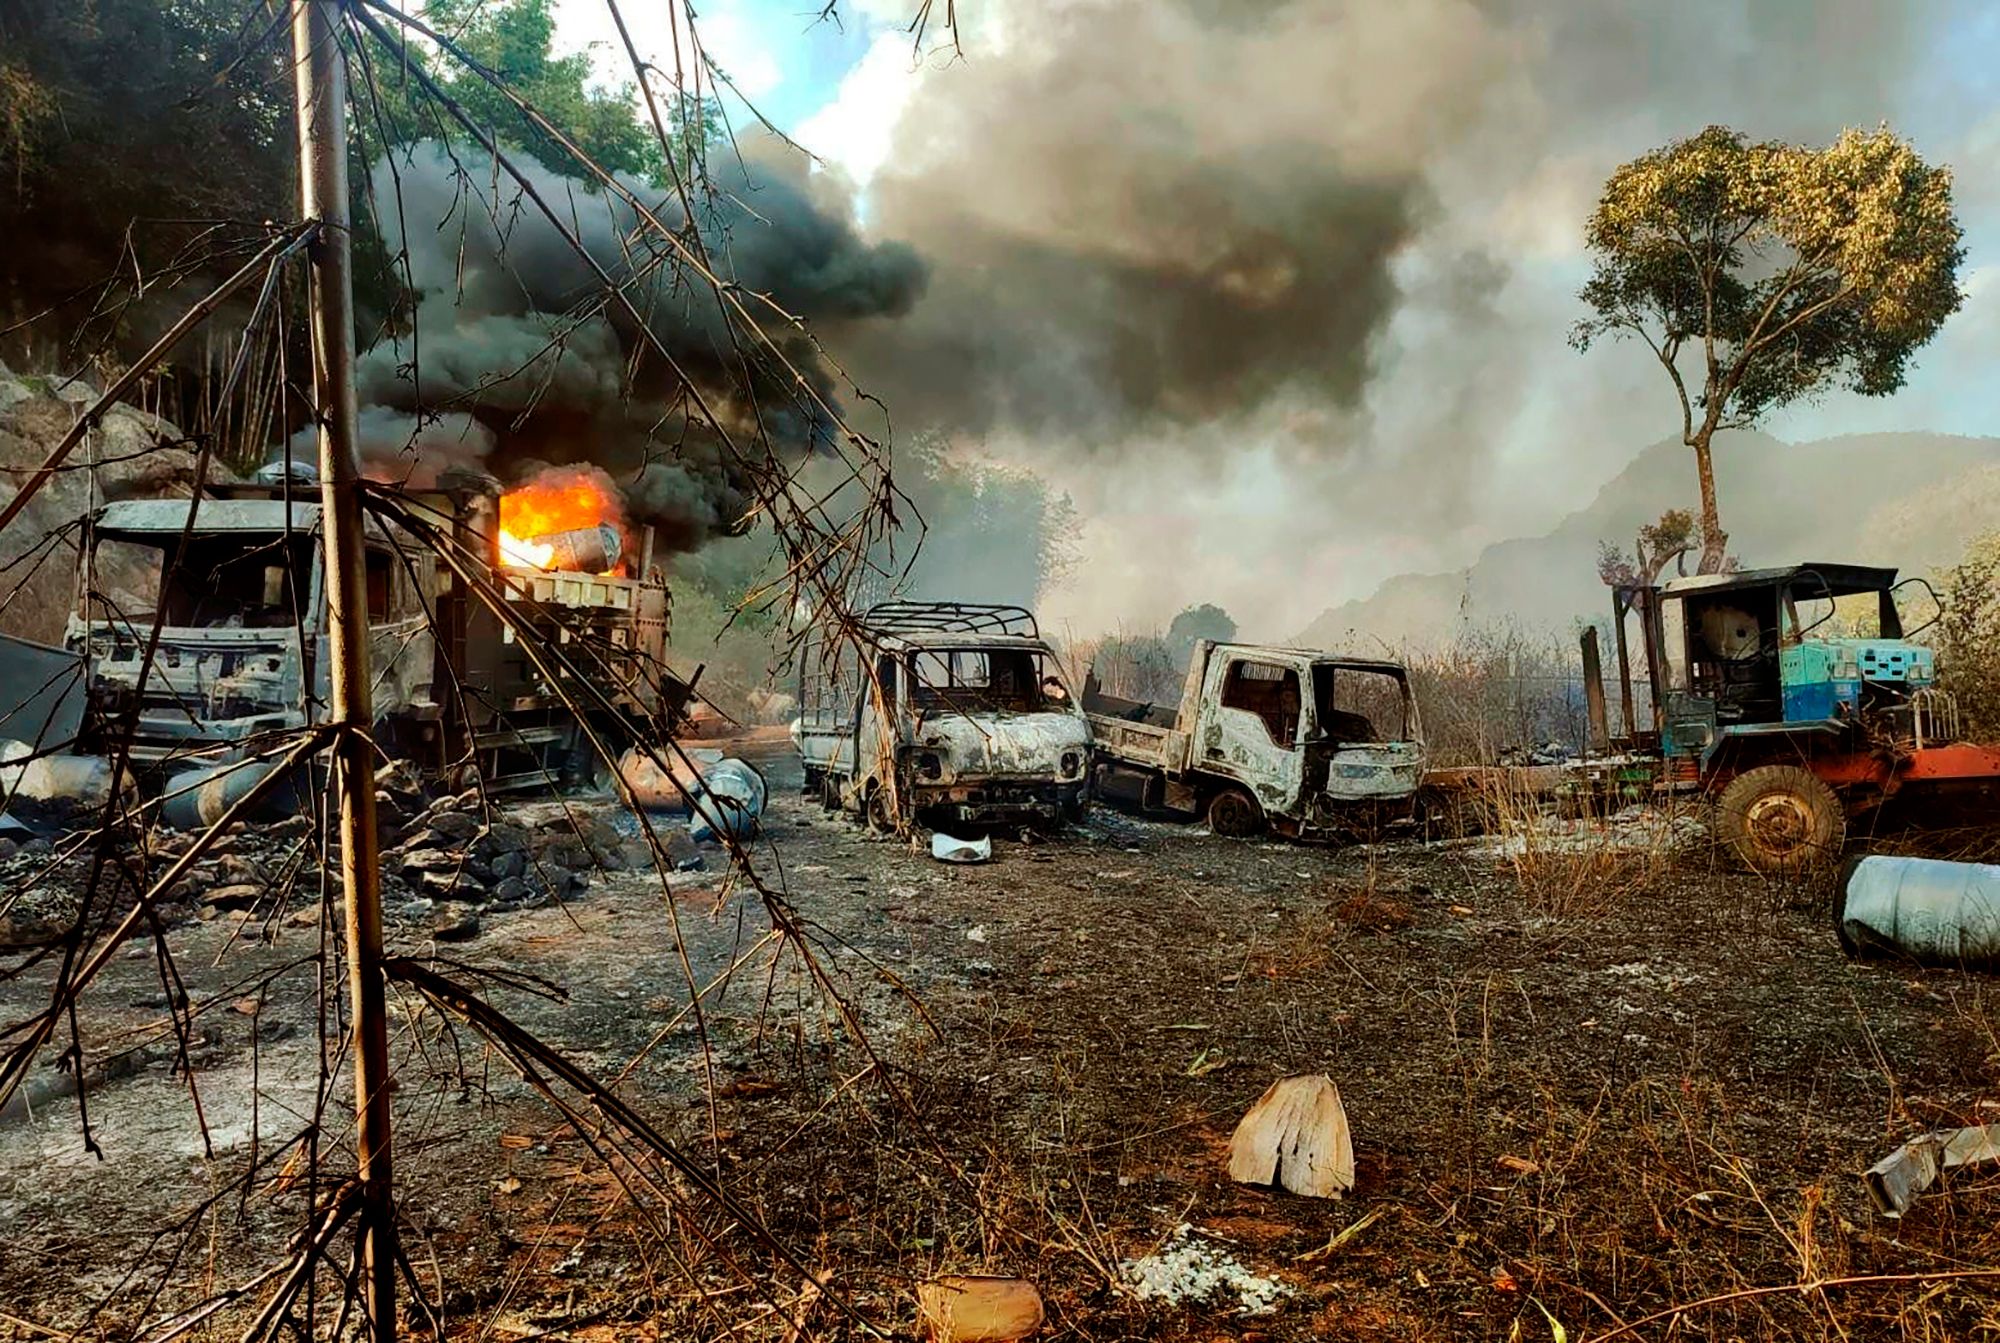 In this photo provided by the Karenni Nationalities Defense Force (KNDF), smokes and flames billow from vehicles in Hpruso township, Kayah state, Myanmar, Friday, Dec. 24, 2021. (KNDF via AP)